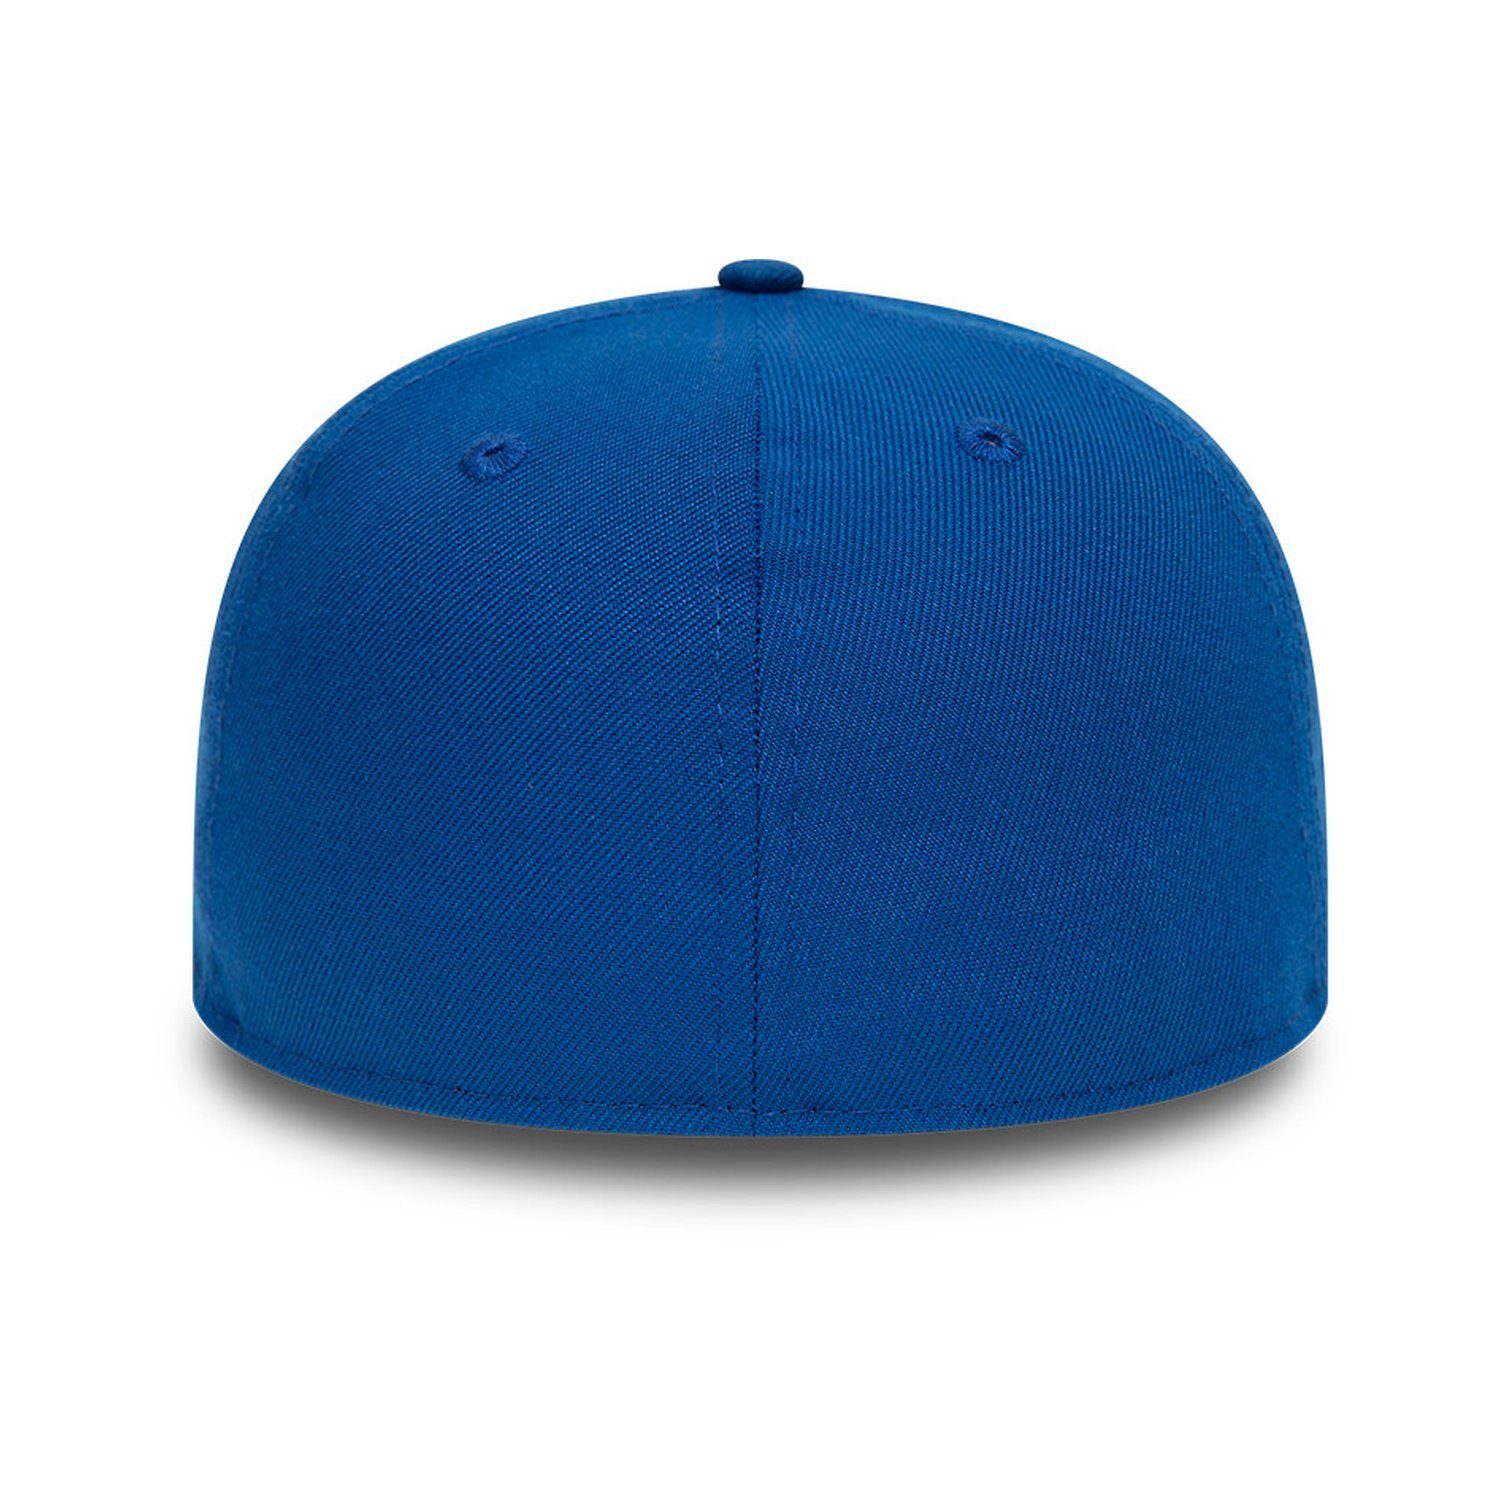 WORLD Toronto Cap SERIES Era Fitted Jays New 59Fifty